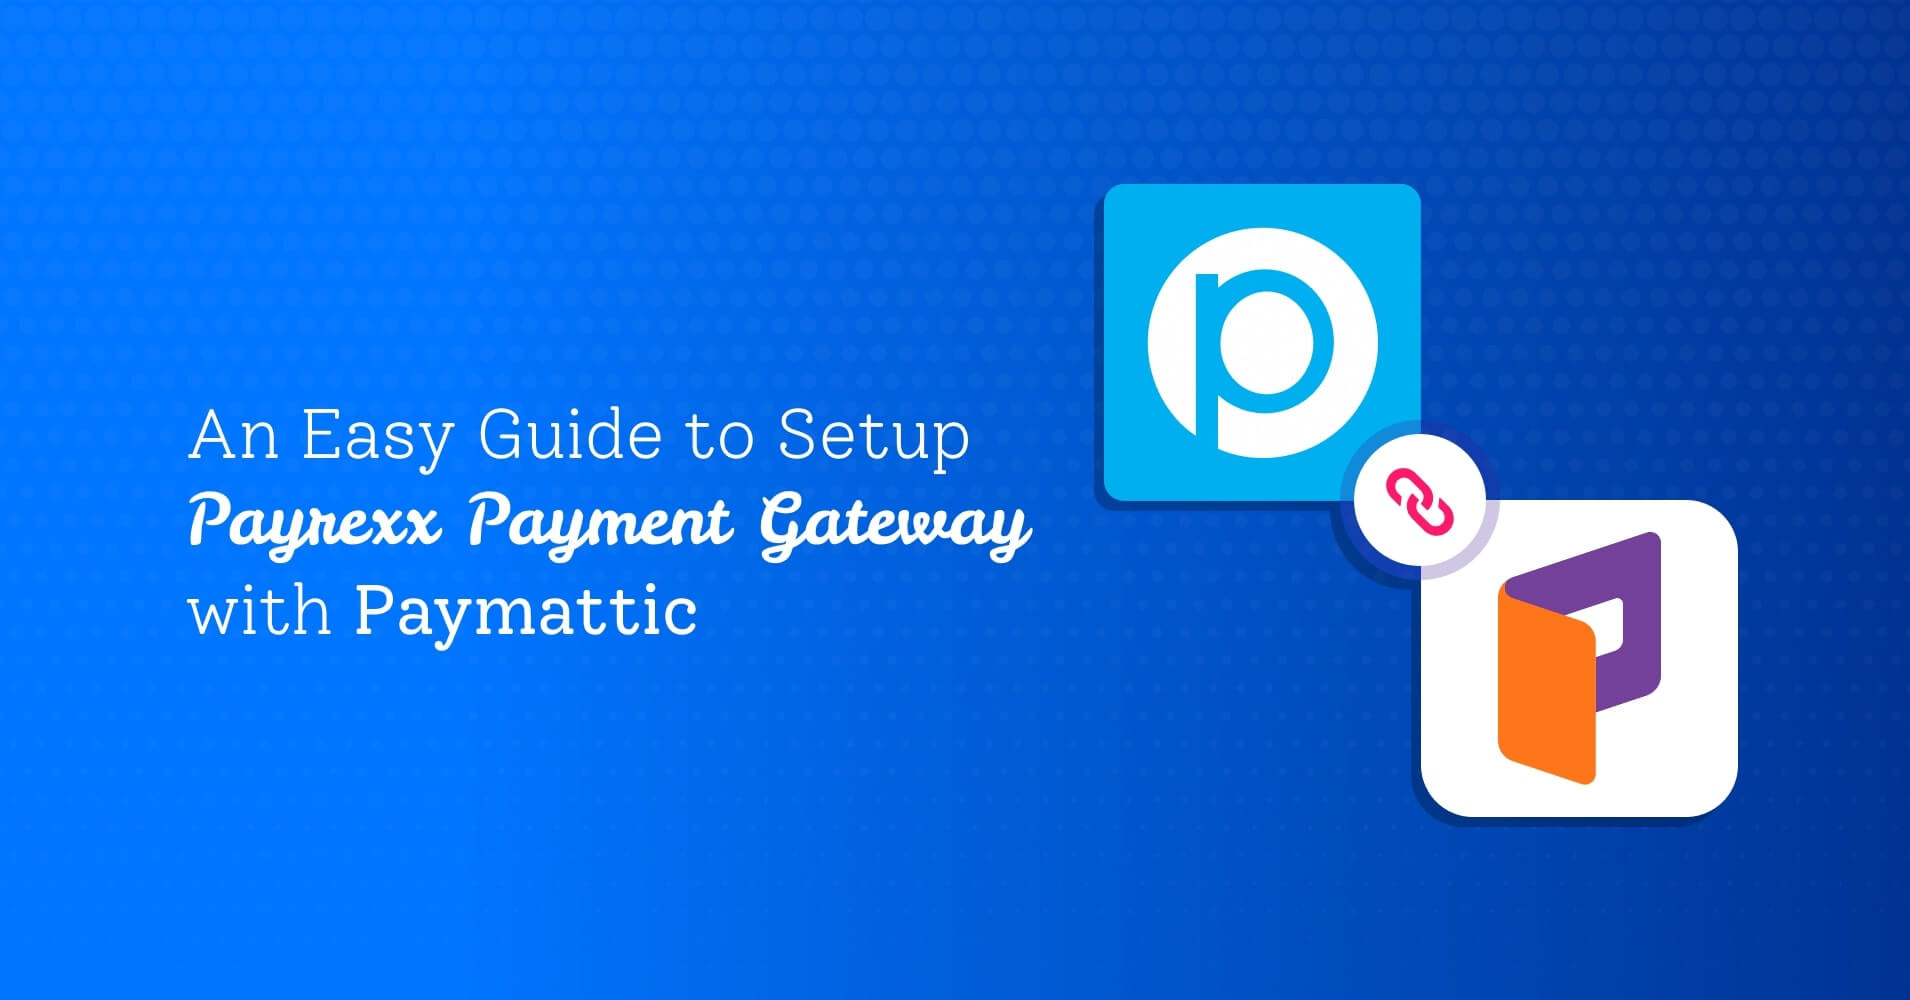 An Easy Guide to Set Up Payrexx Payment Gateway with Paymattic